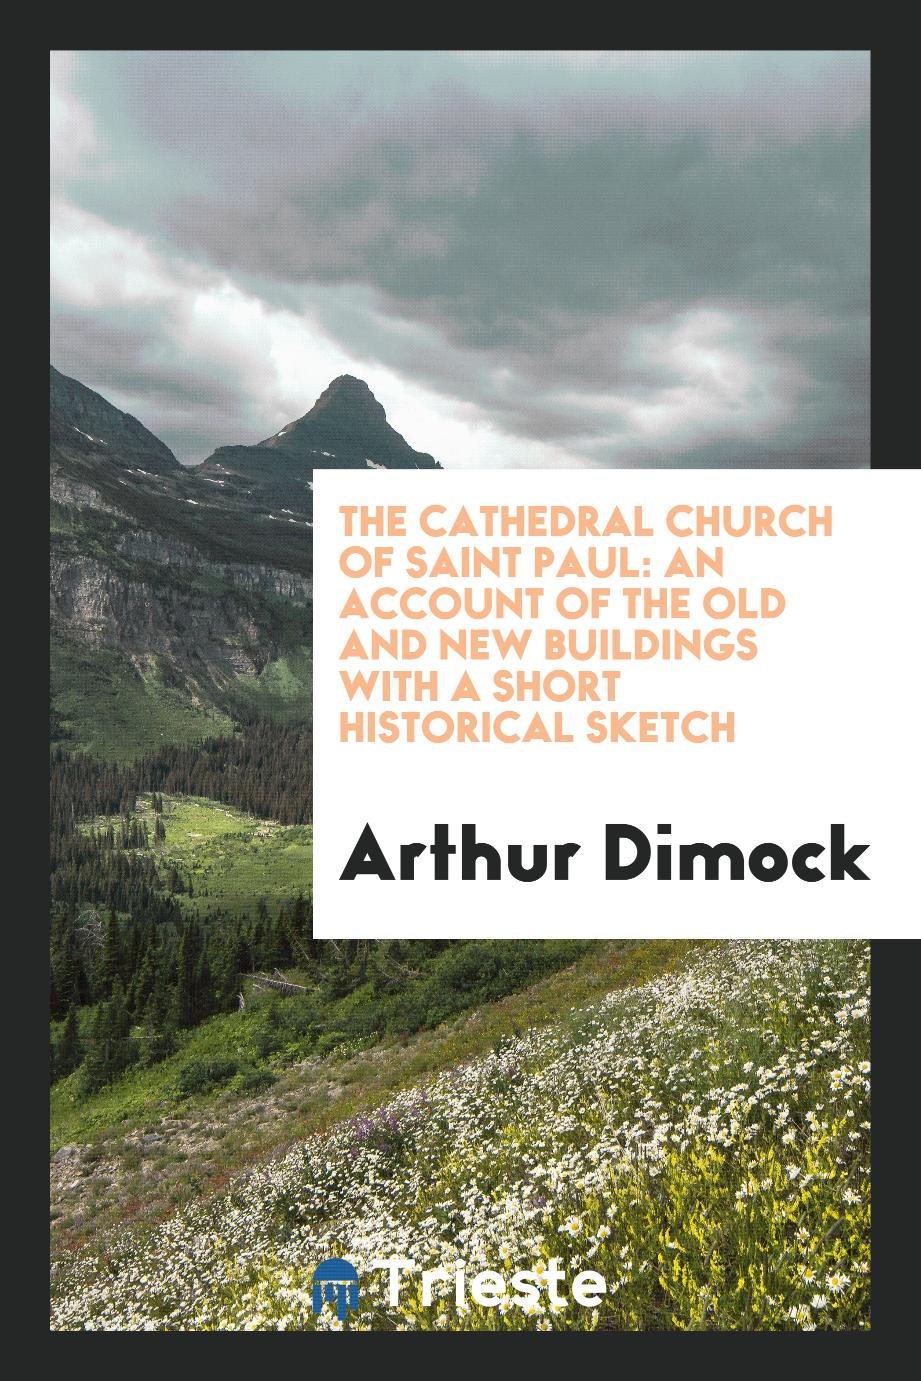 The Cathedral Church of Saint Paul: an Account of the Old and New Buildings with a Short Historical Sketch